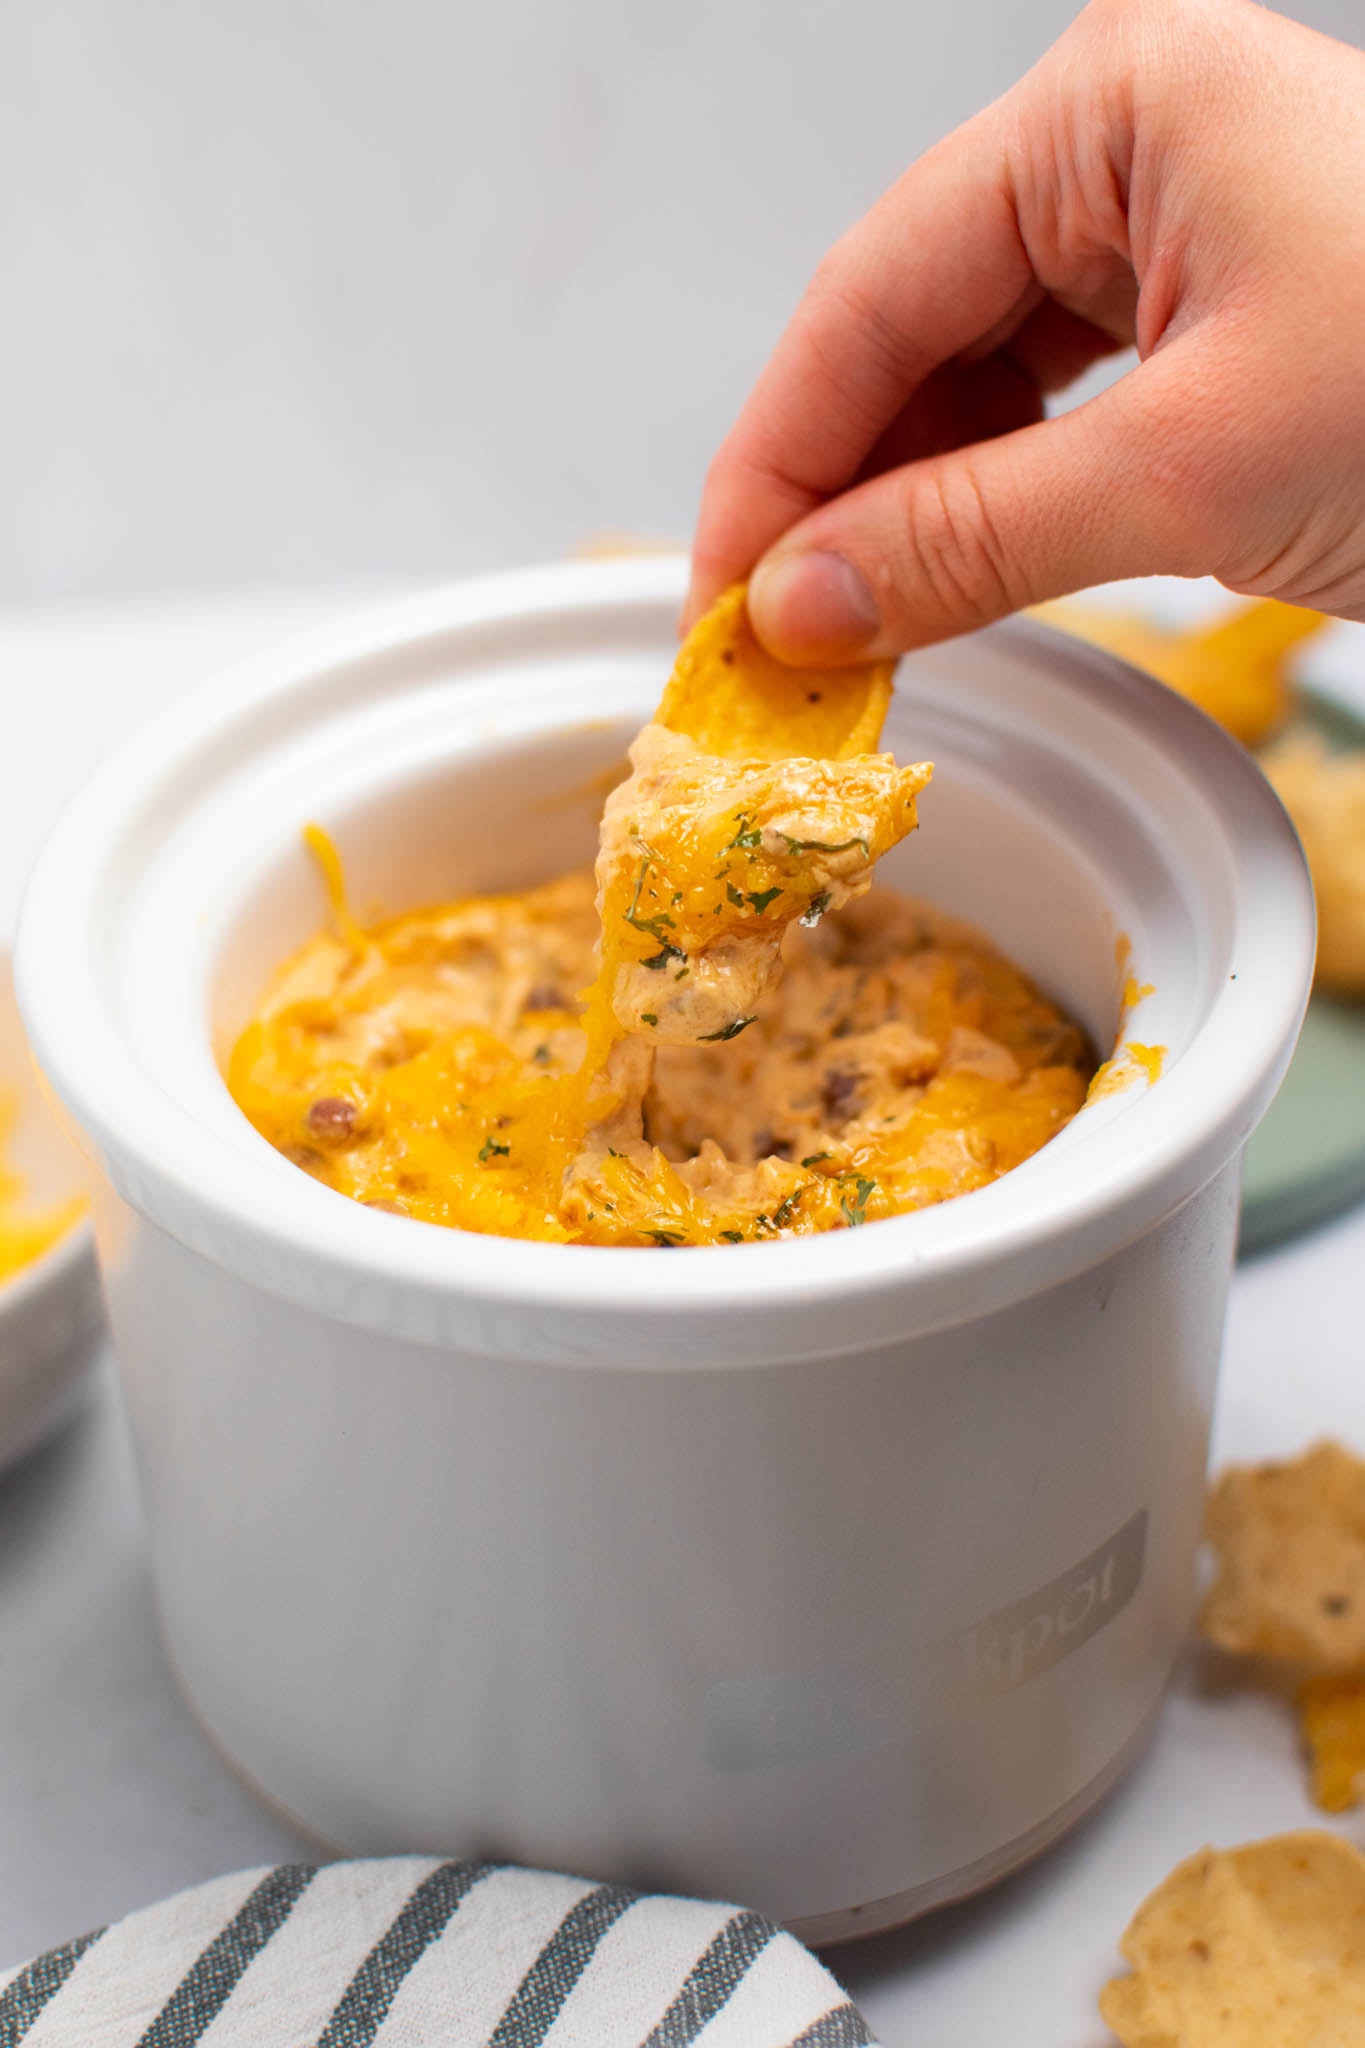 Woman hold Frito chip with chili cheese dip spilling off.